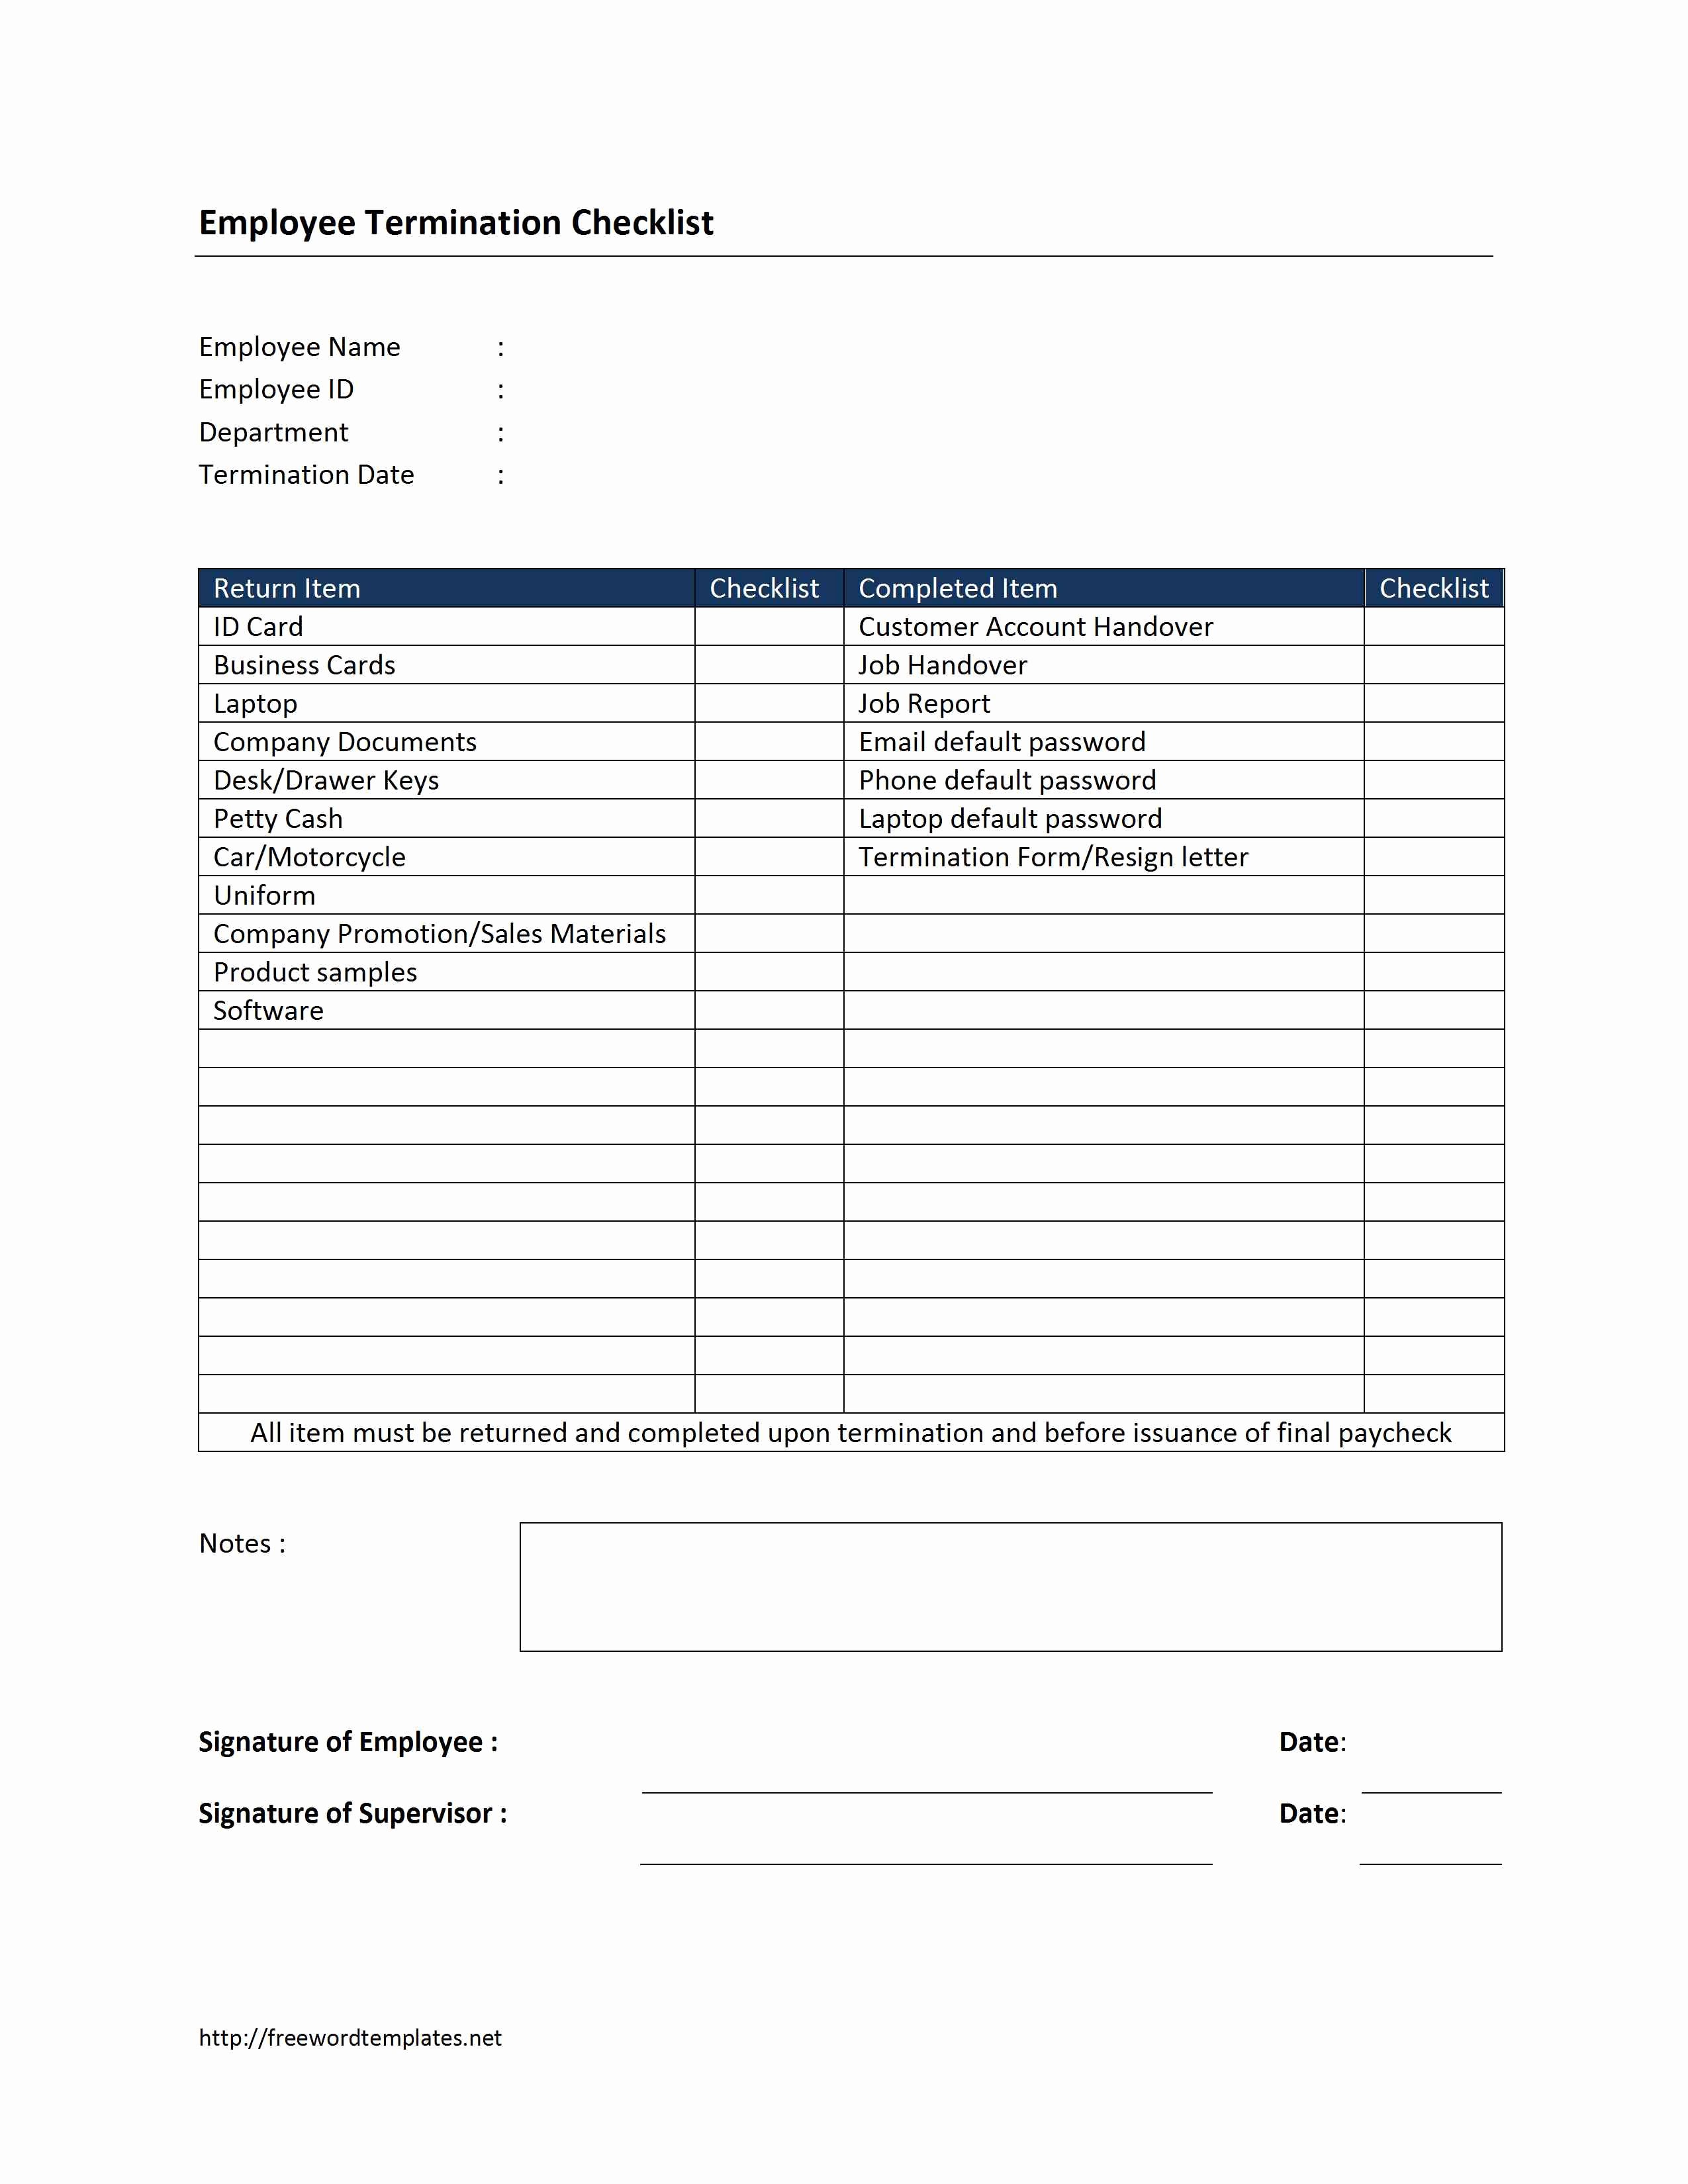 Free New Hire Checklist Template Lovely Employee Termination Checklist